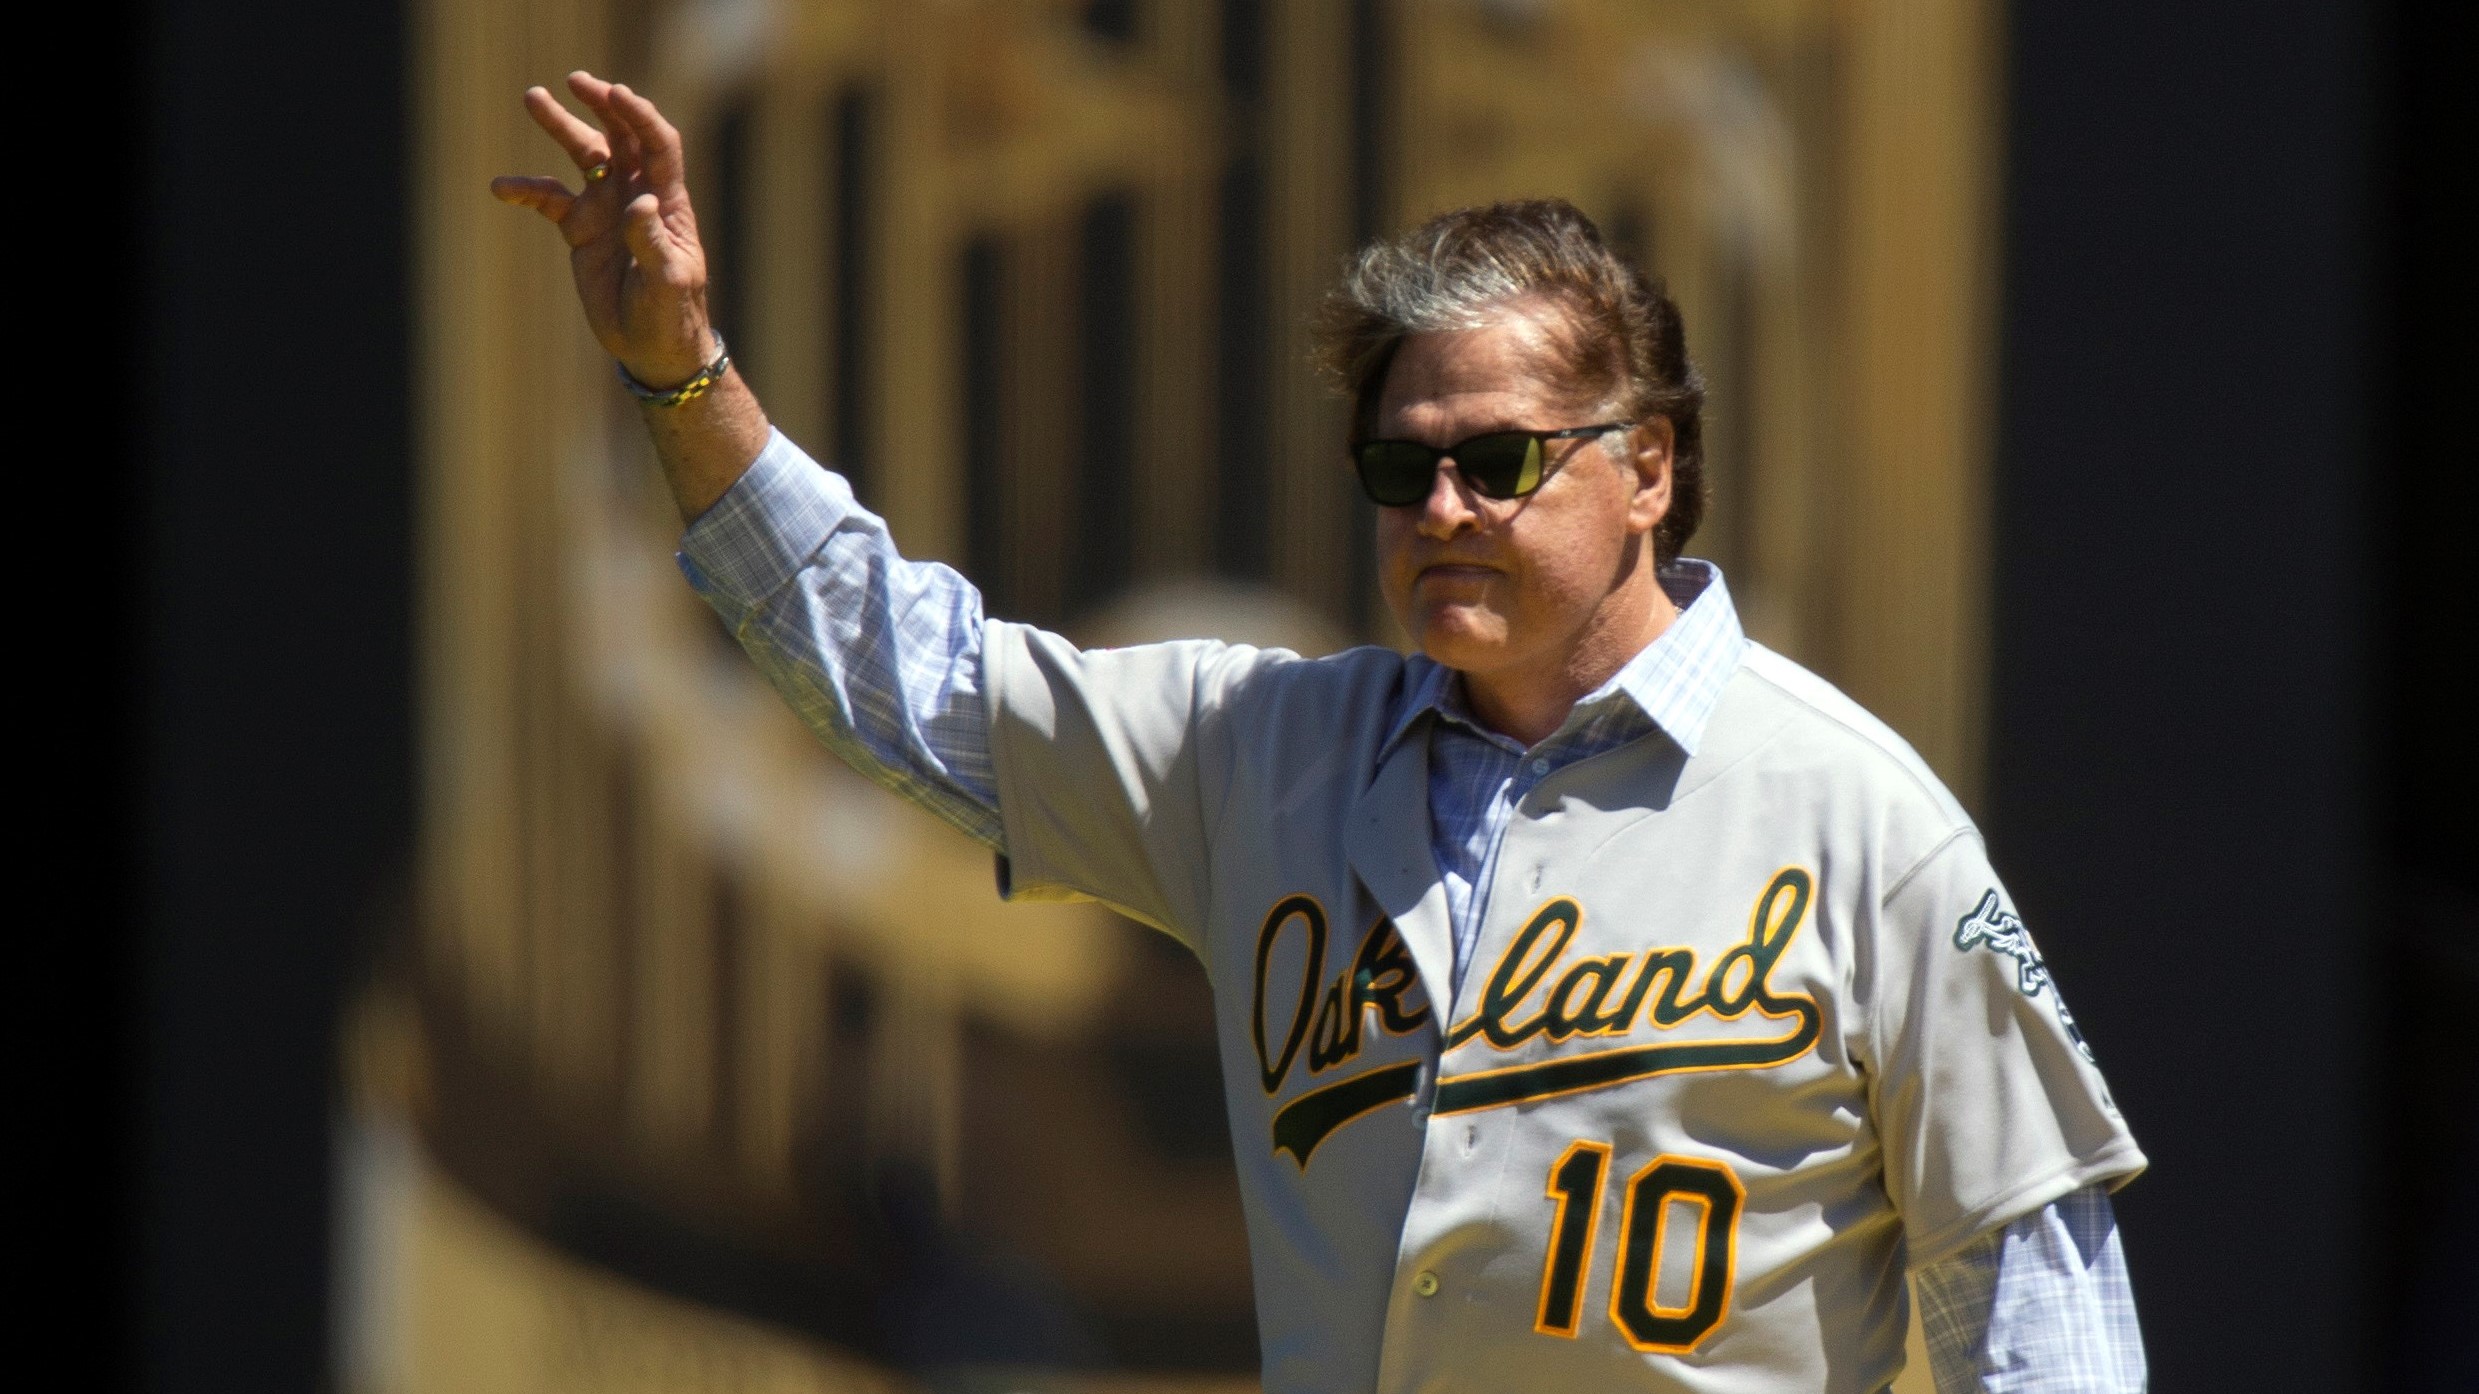 Tony La Russa named Chicago White Sox manager - ABC7 Chicago